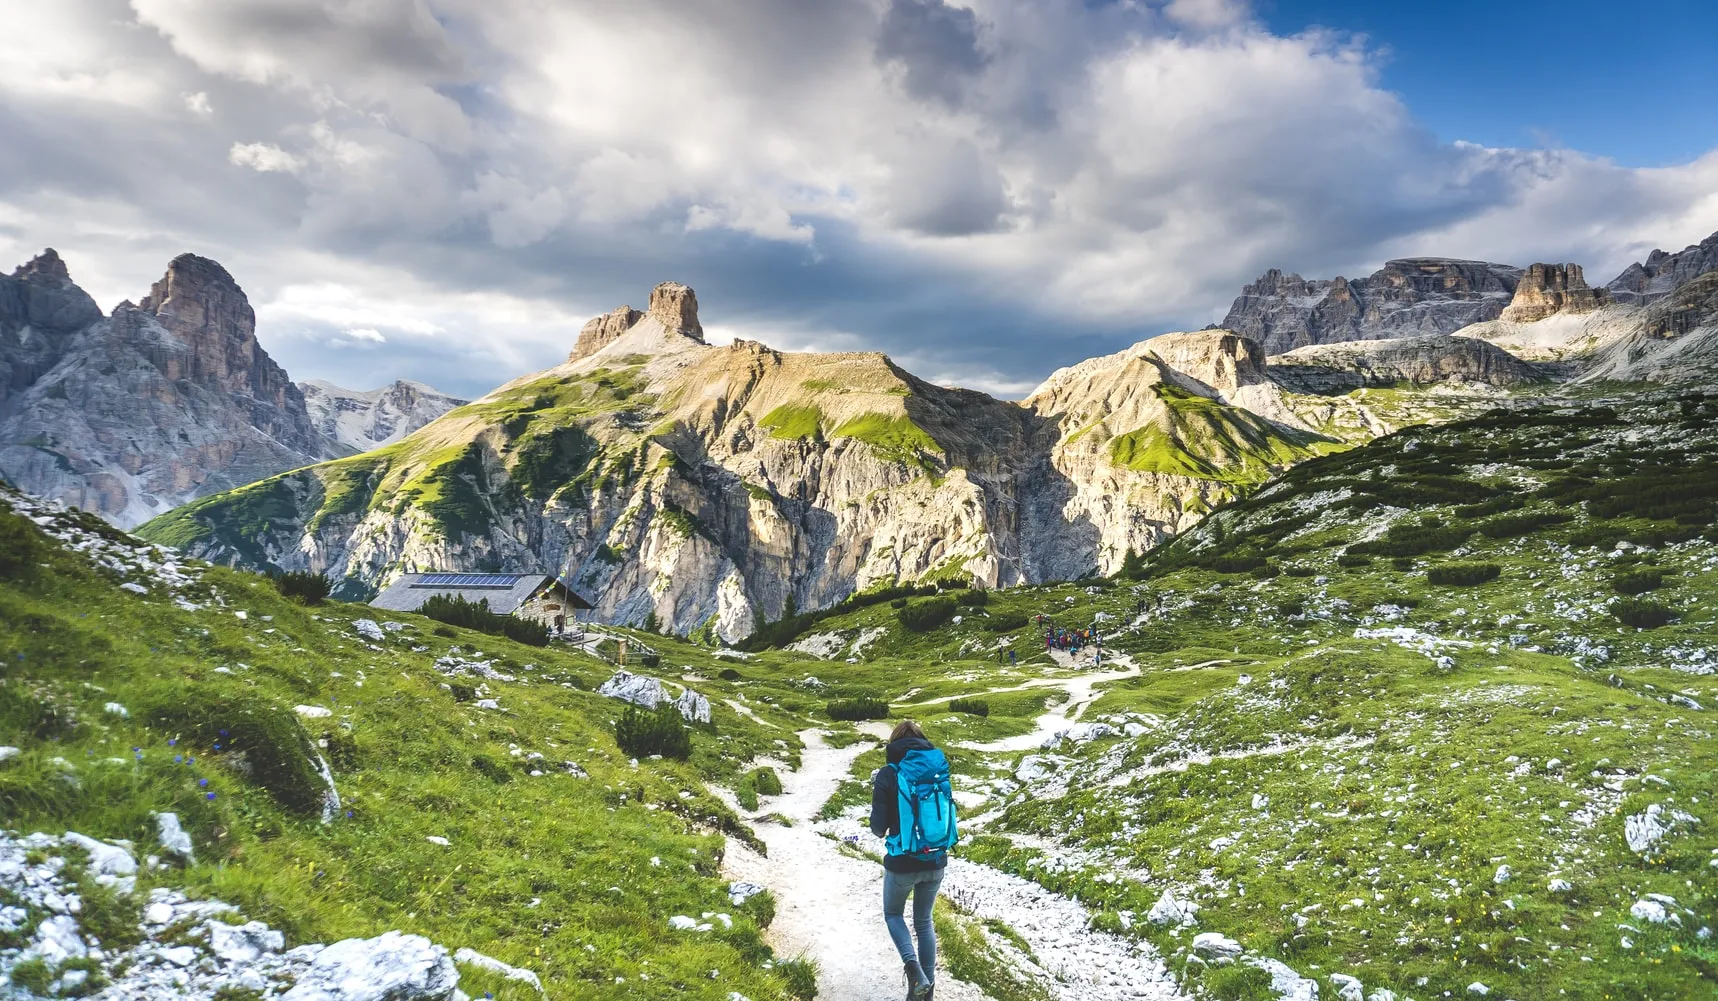 Trekking & Hiking Activities - Hiking trails for tourists in the mountains